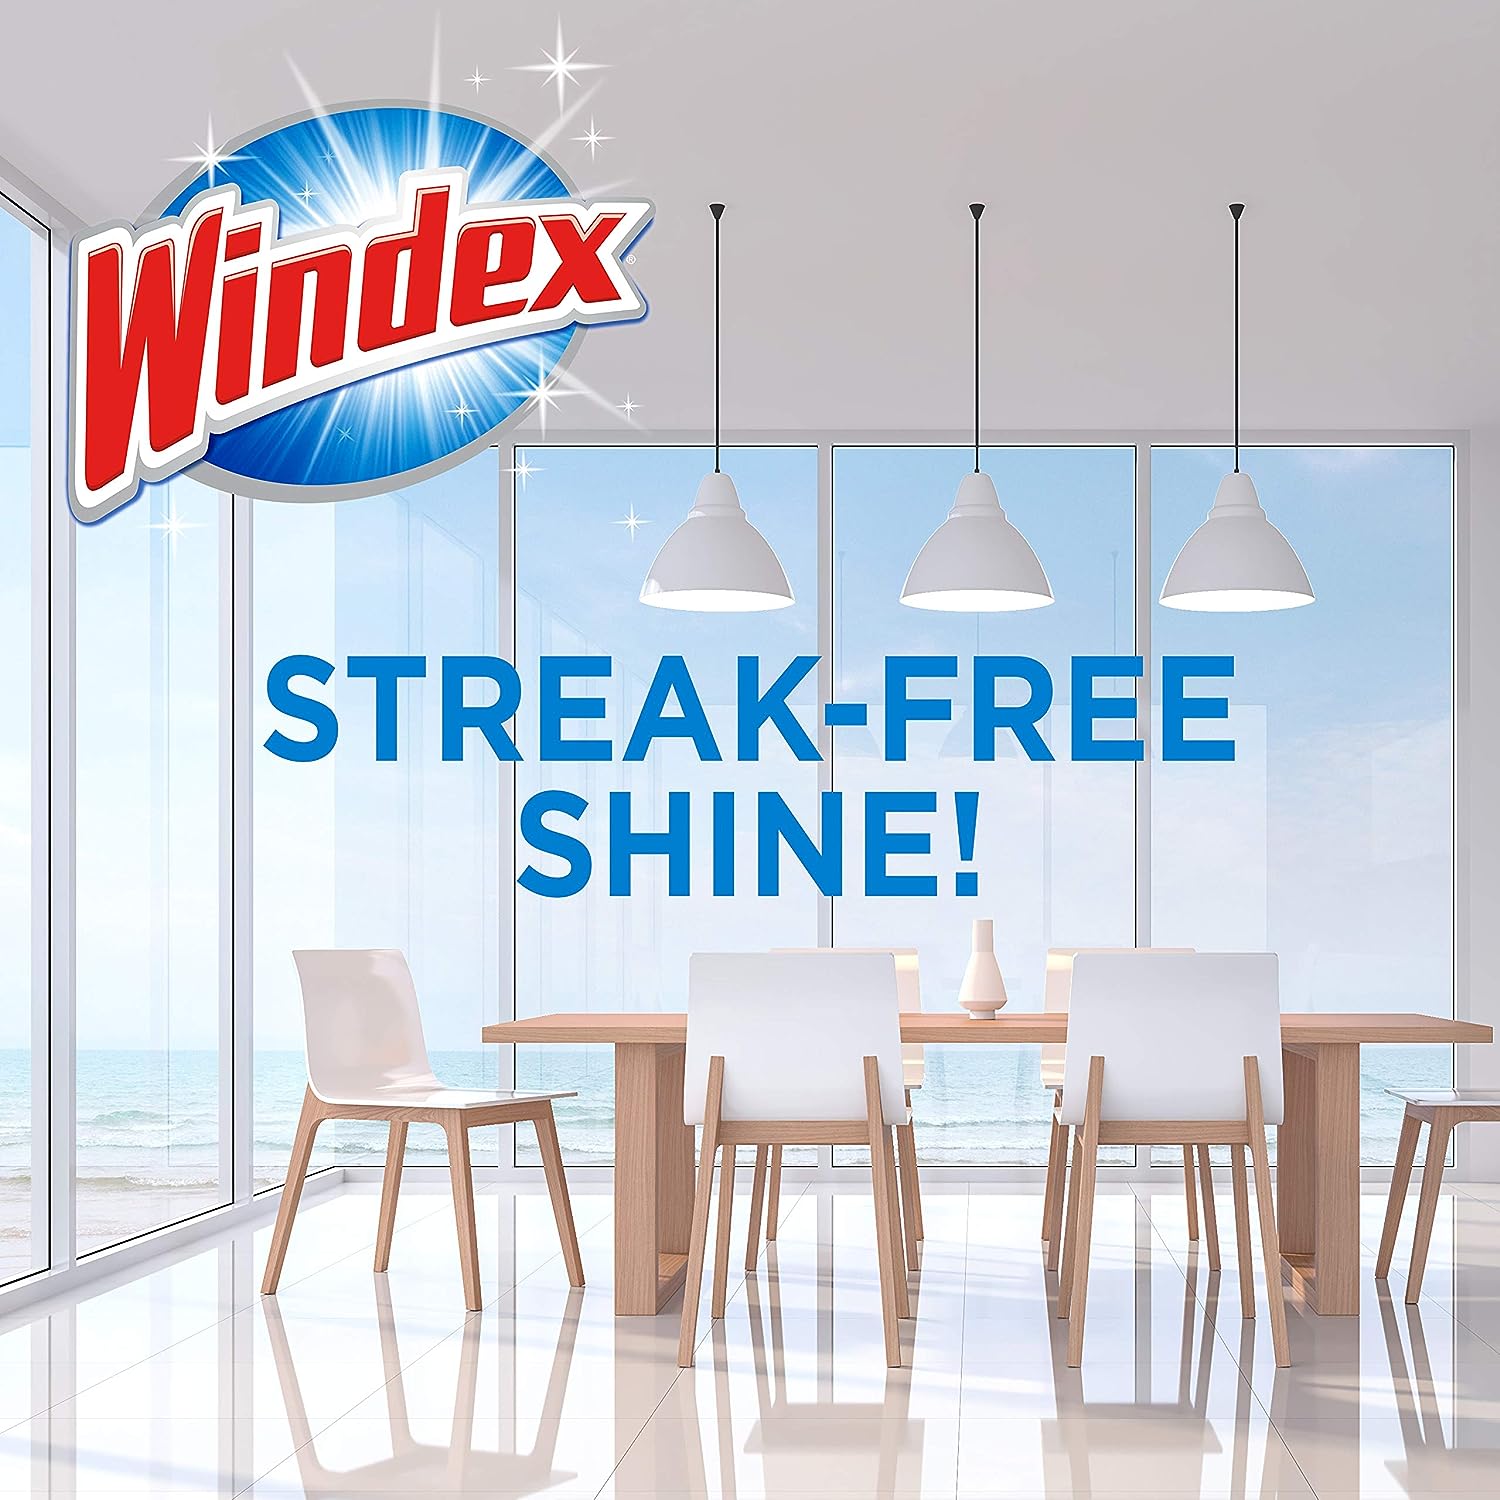 Windex Original Glass Wipes, Pre-Moistened Glass and Surface Wipes Clean and Provide a Streak-Free Shine, 38 Count, Pack of 6 : Industrial & Scientific